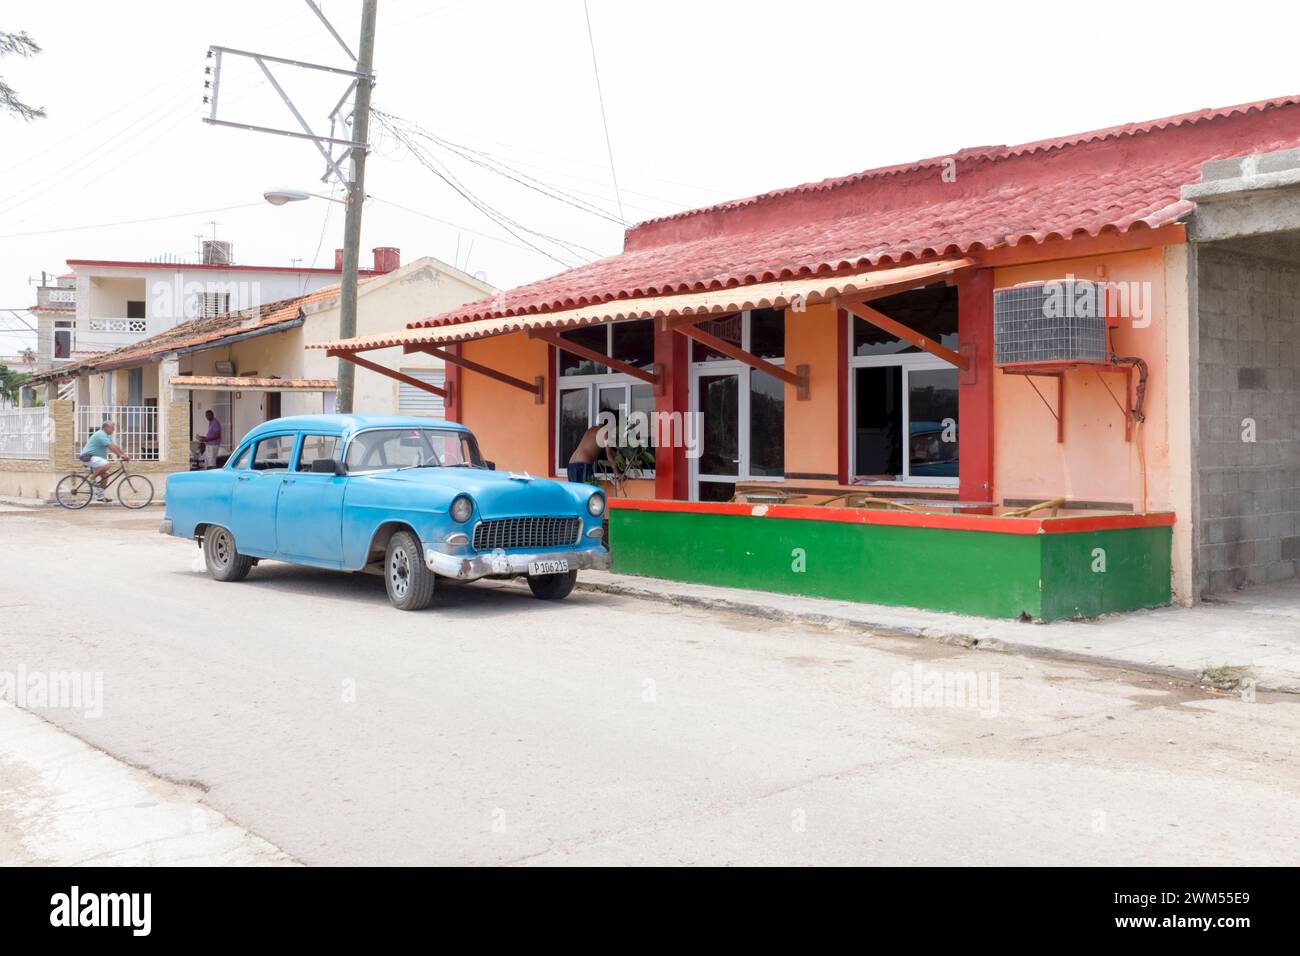 The 'Infotur' on Cojimar's Malecon is a point of sale for drinks, ice cream and cigarettes in convertible currency. Stock Photo